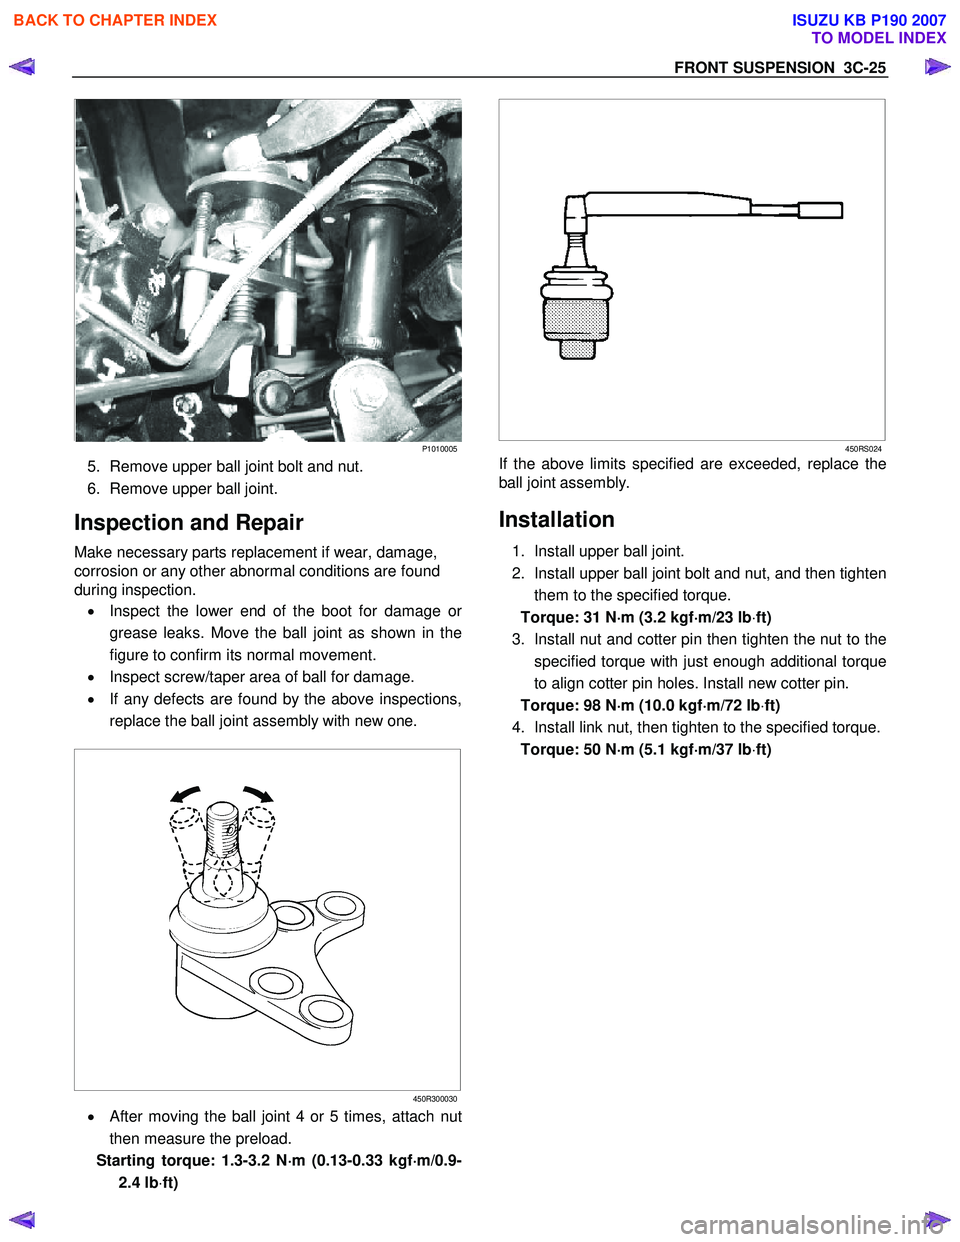 ISUZU KB P190 2007  Workshop Repair Manual FRONT SUSPENSION  3C-25 
 
P1010005
5.  Remove upper ball joint bolt and nut.  
6.  Remove upper ball joint. 
Inspection and Repair 
Make necessary parts replacement if wear, damage,  
corrosion or an